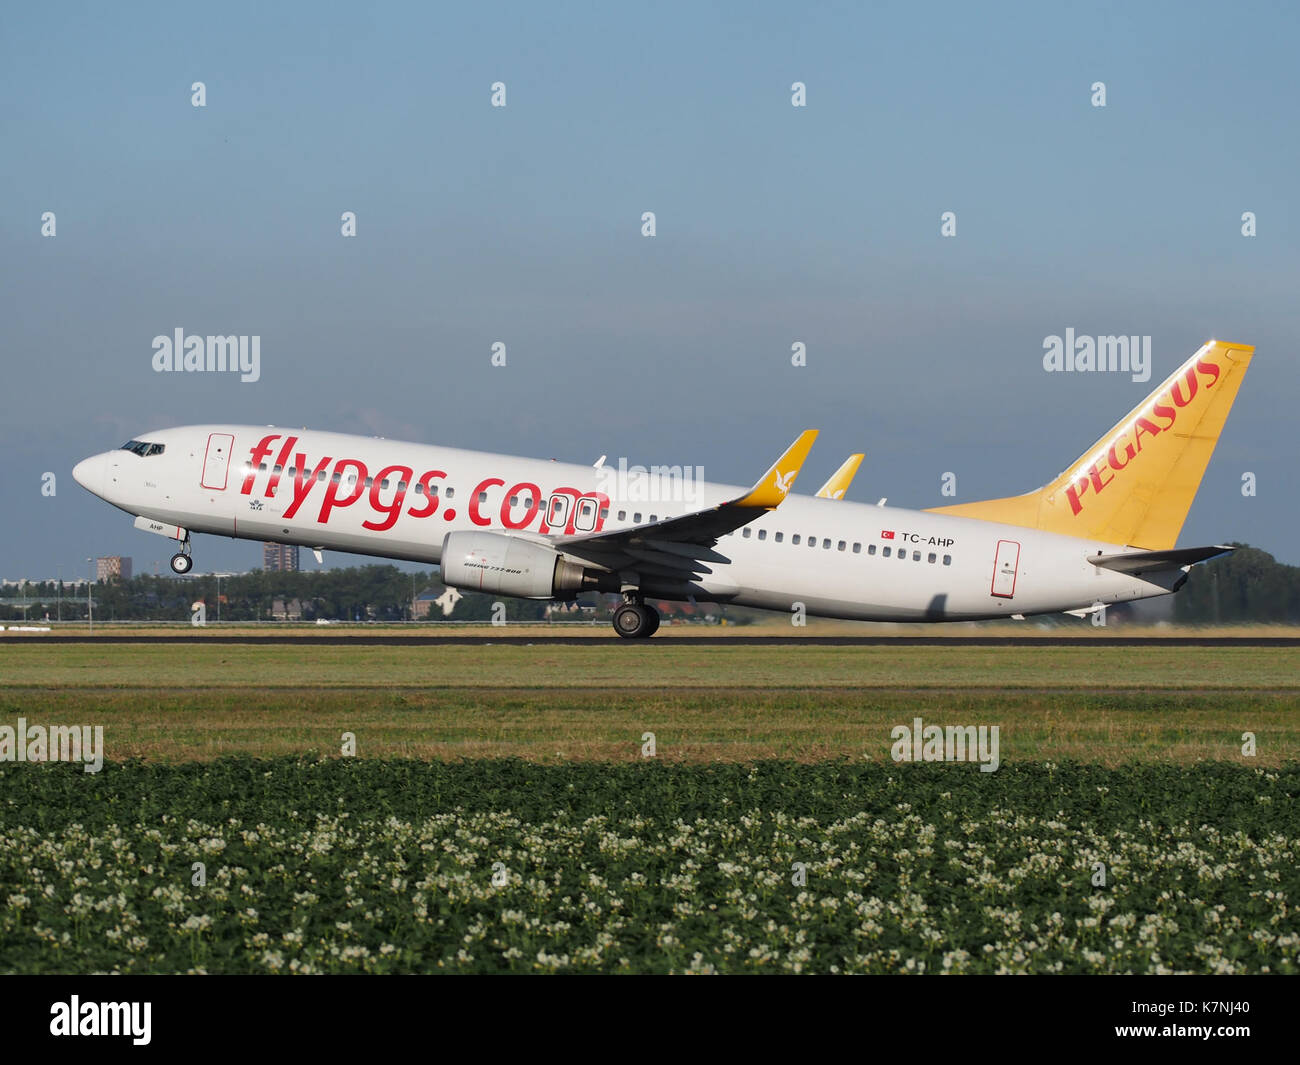 TC-AHP Pegasus Boeing 737-82R(WL) cn40721 takeoff from Schiphol (AMS - EHAM), The Netherlands pic2 Stock Photo